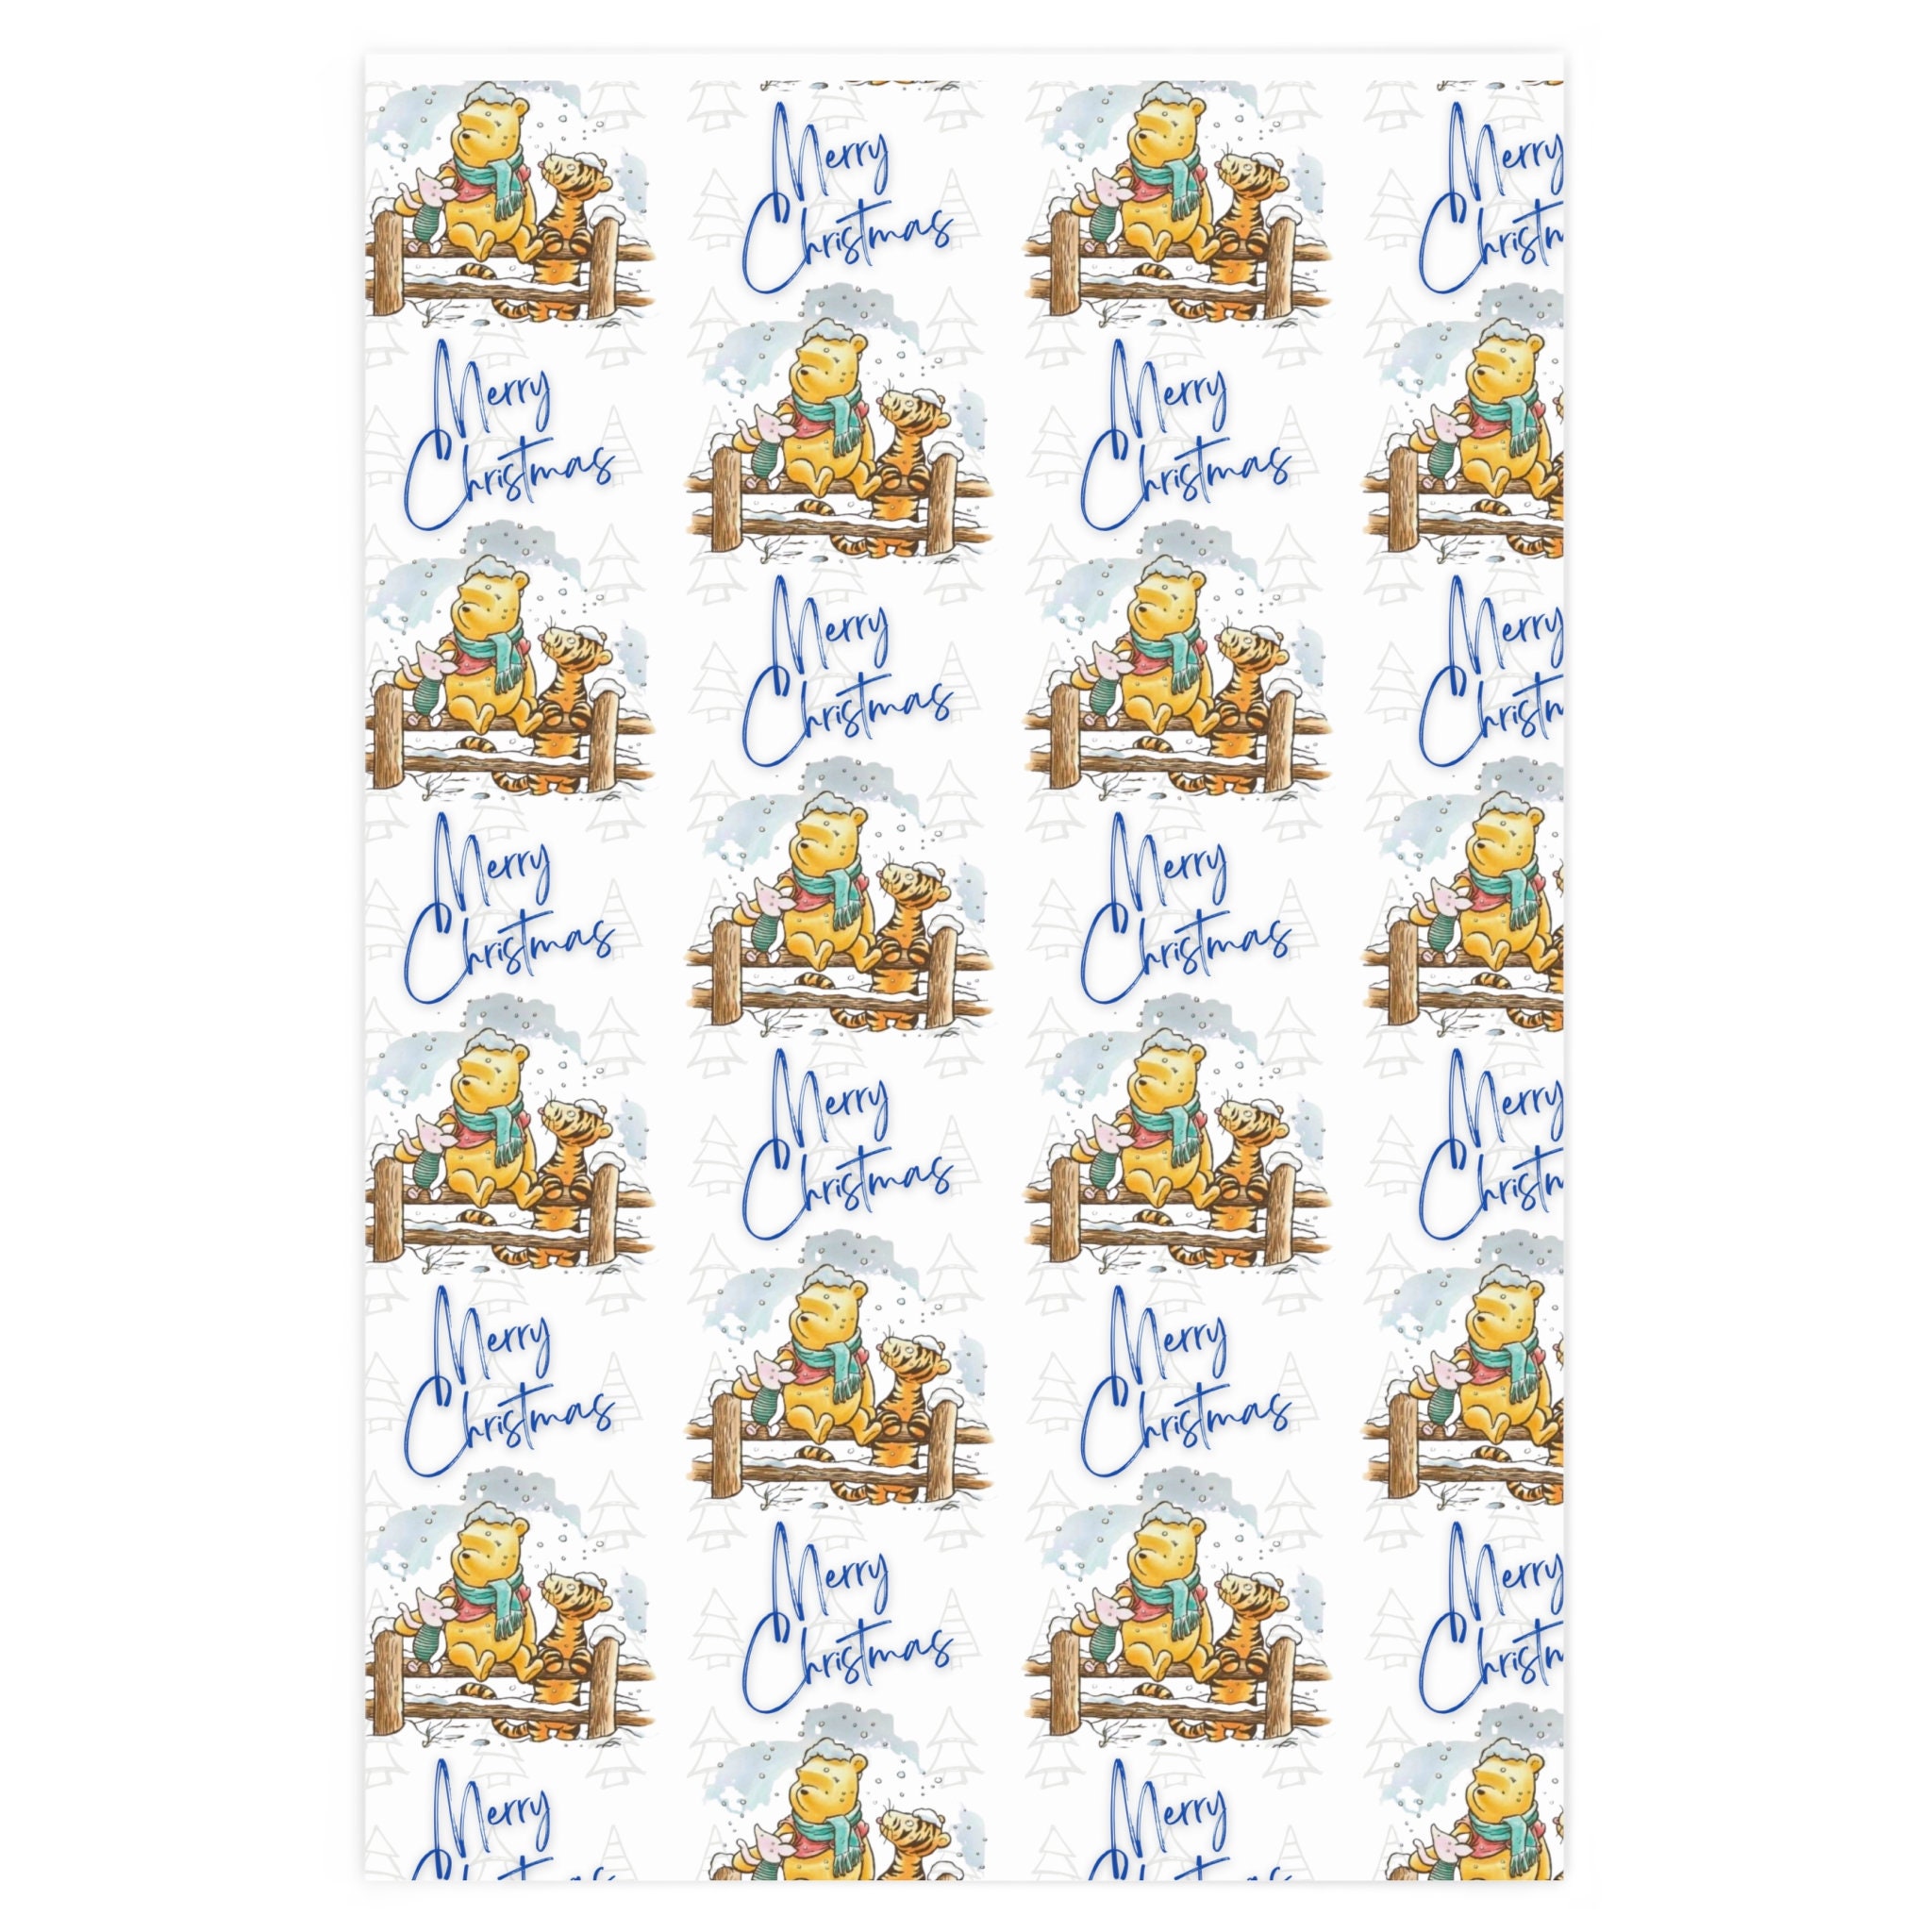 Winnie the Pooh Wrapping Paper, Merry Christmas sold by Carlos Serrano, SKU 90352693